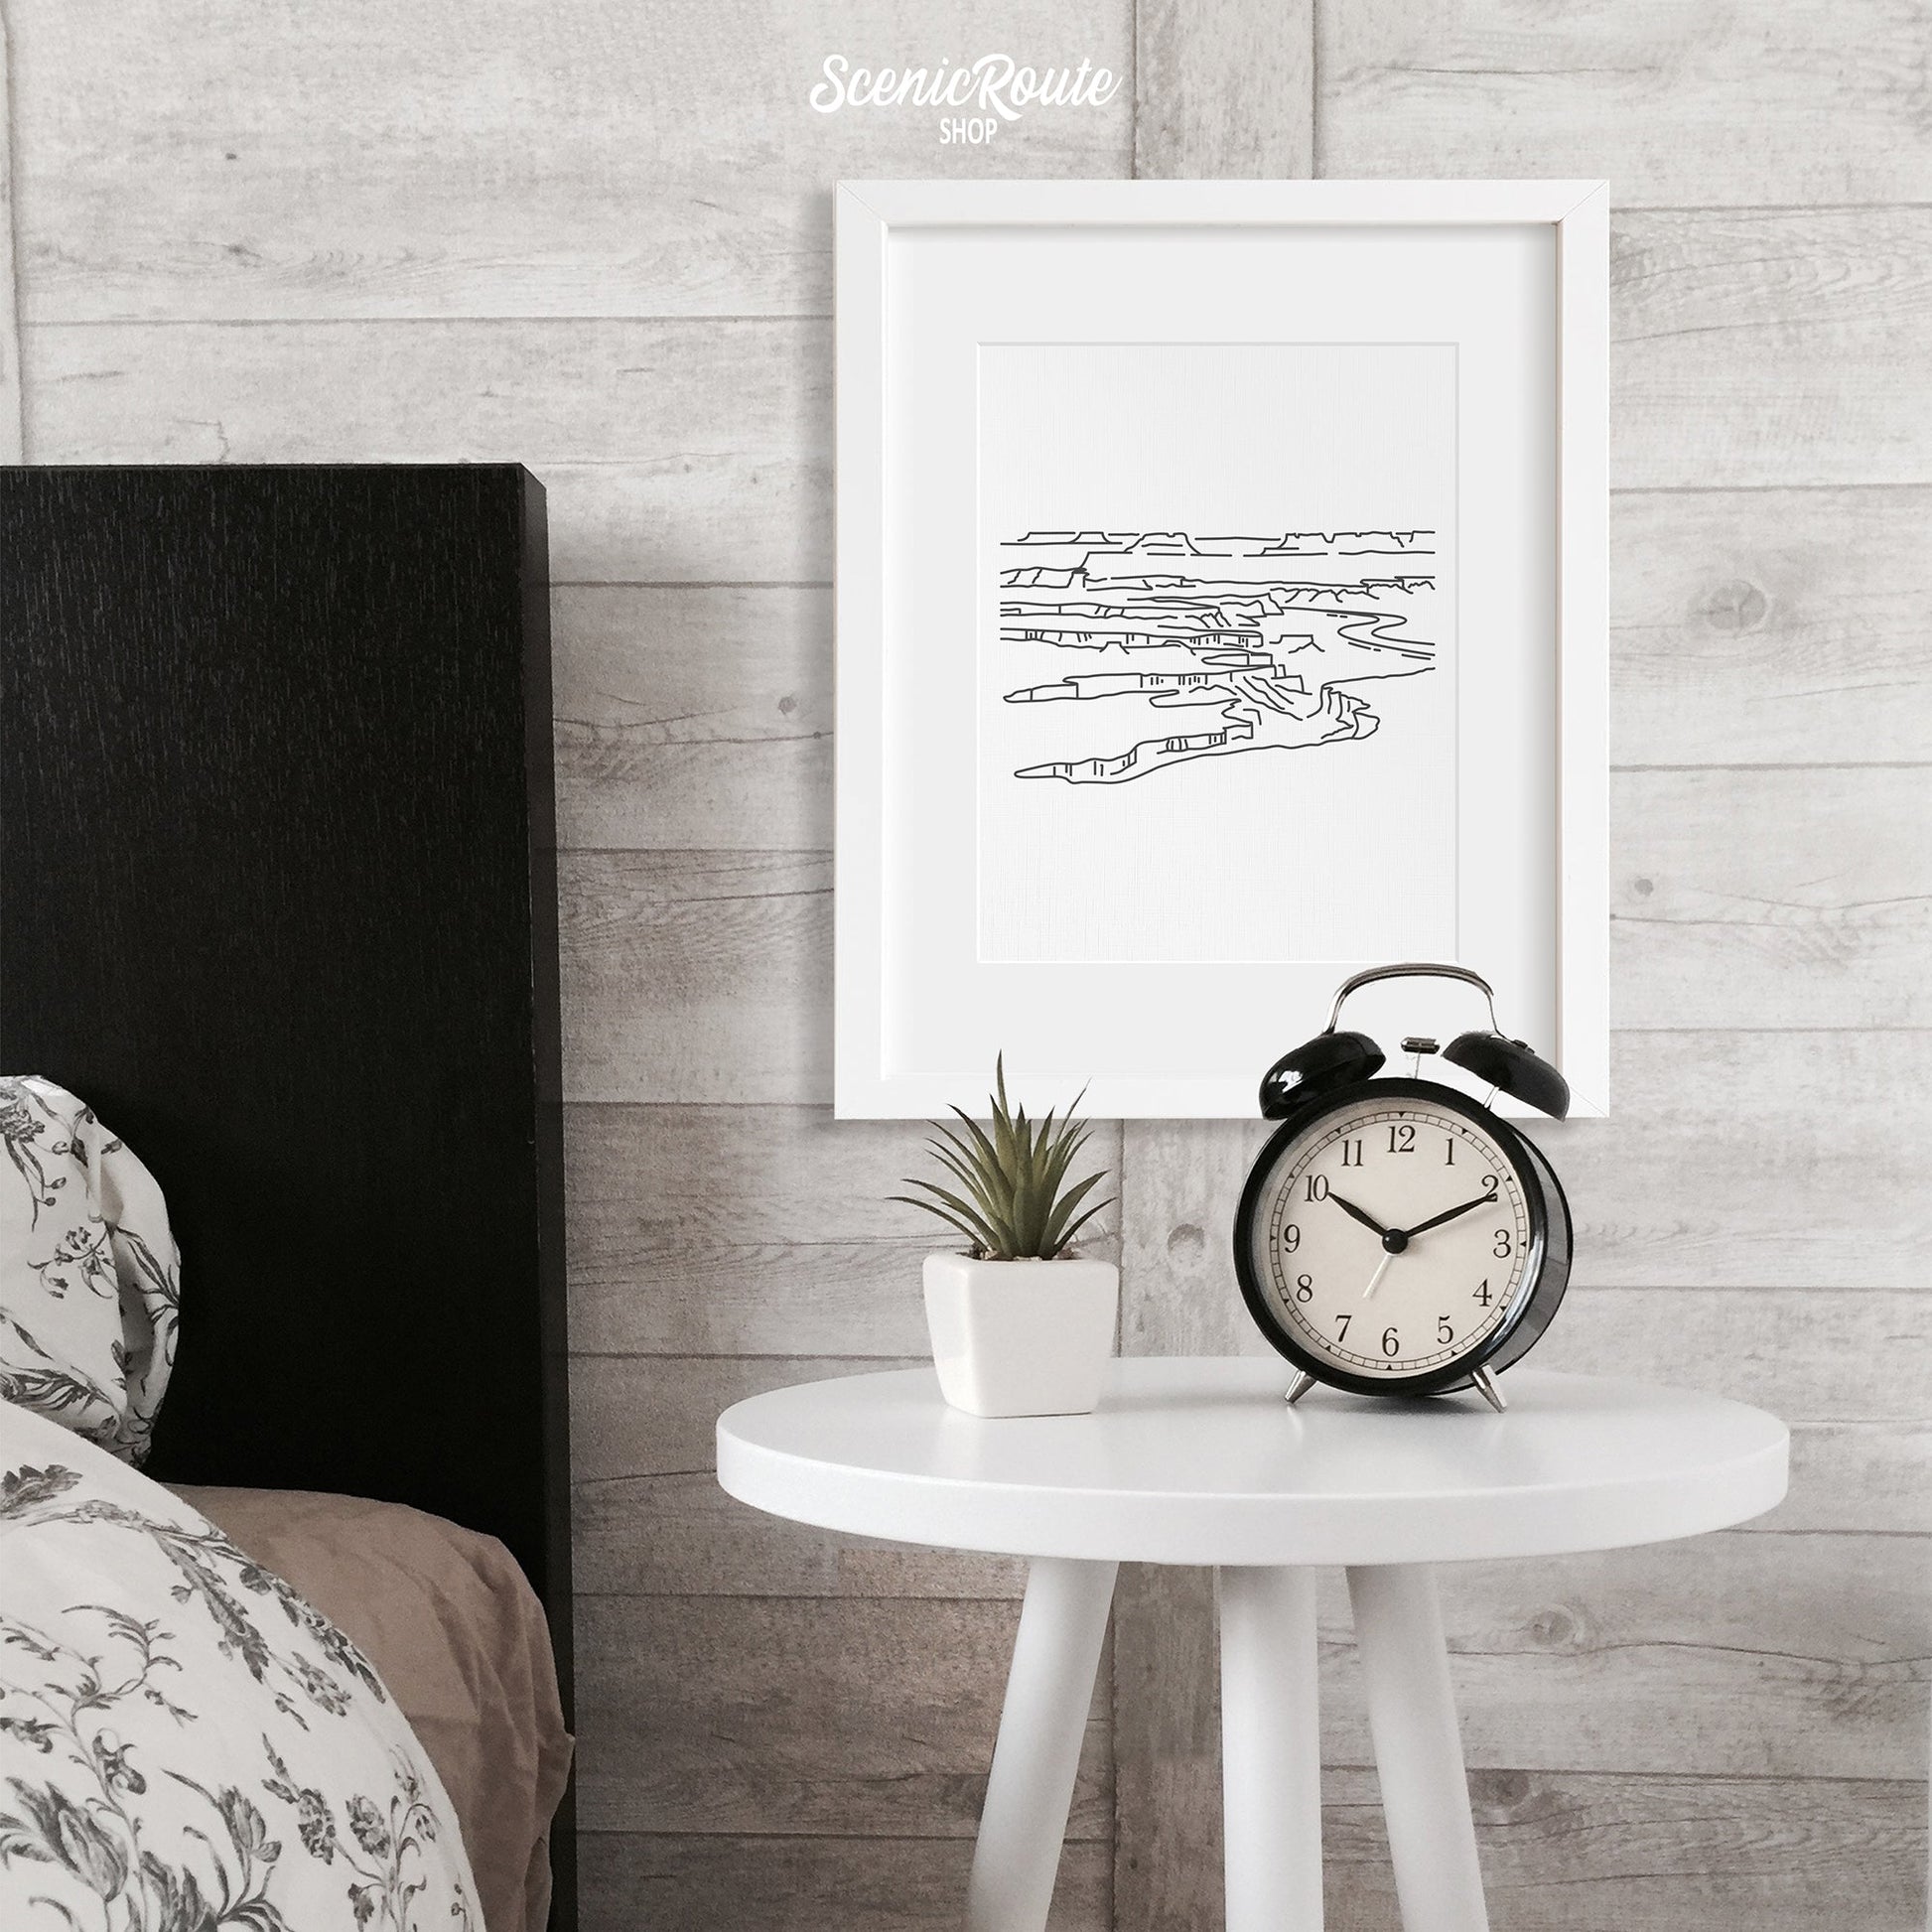 A framed line art drawing of Canyonlands National Park above a nightstand next to a bed